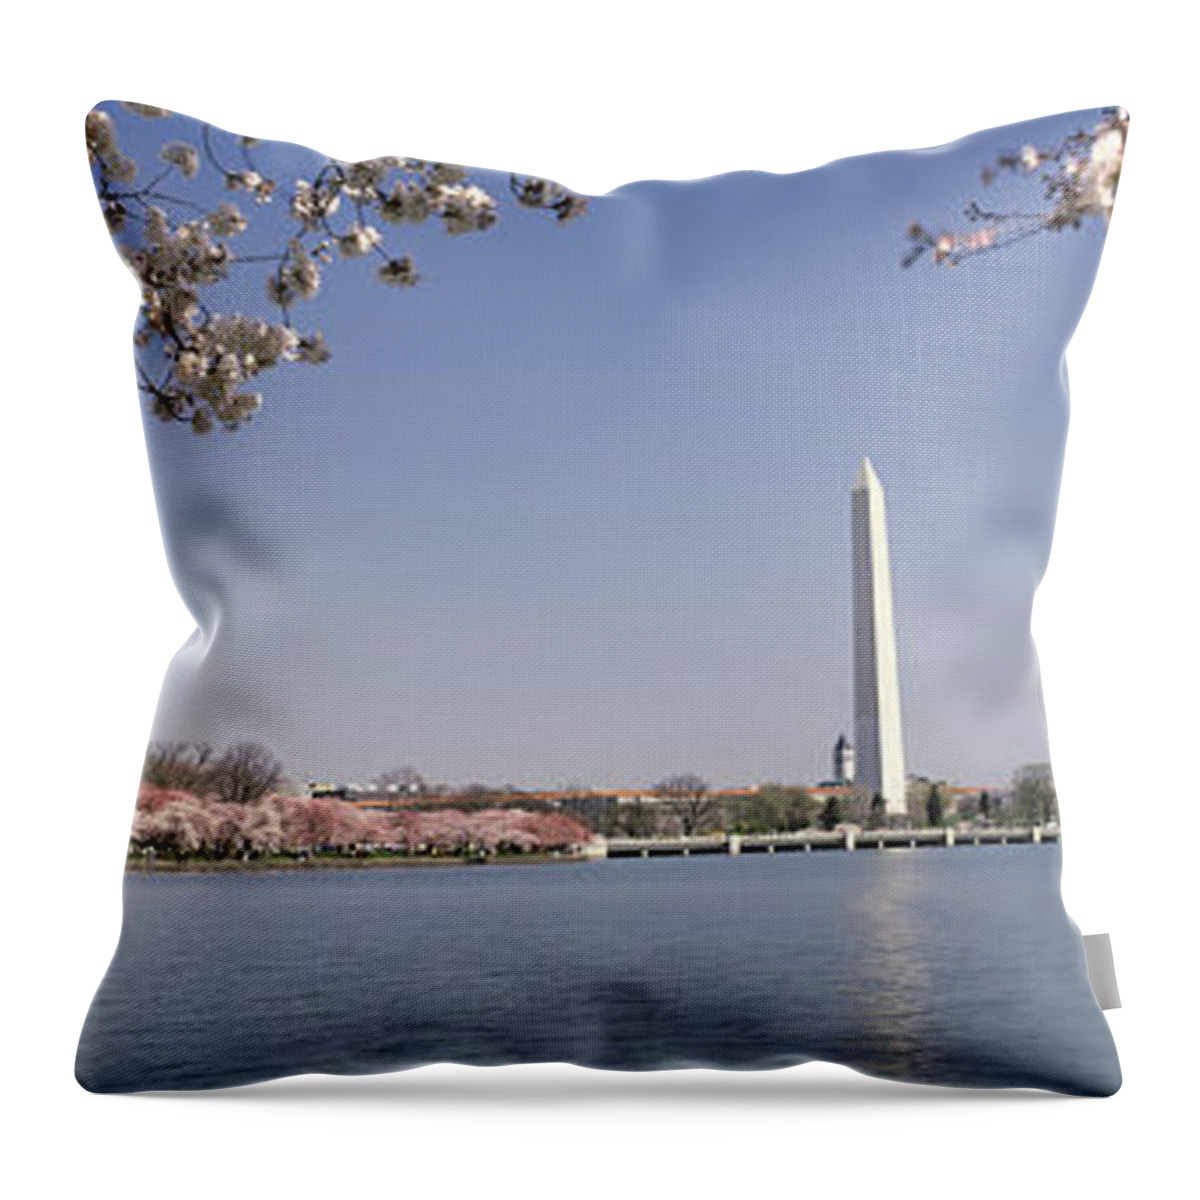 Photography Throw Pillow featuring the photograph Cherry Blossom With Monument by Panoramic Images